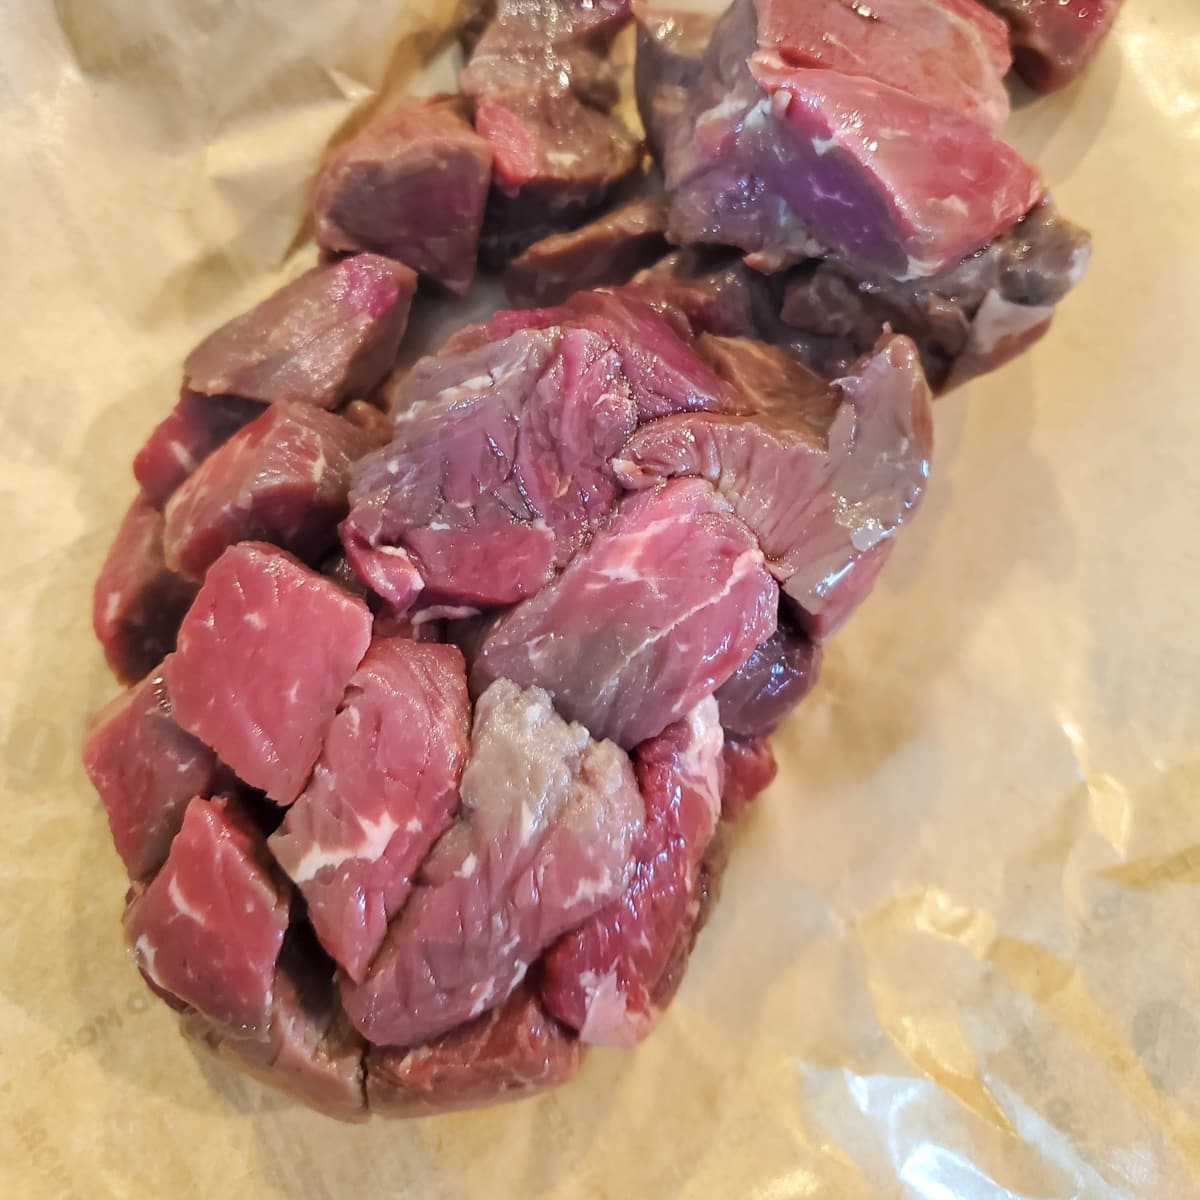 Cubed beef for stew.